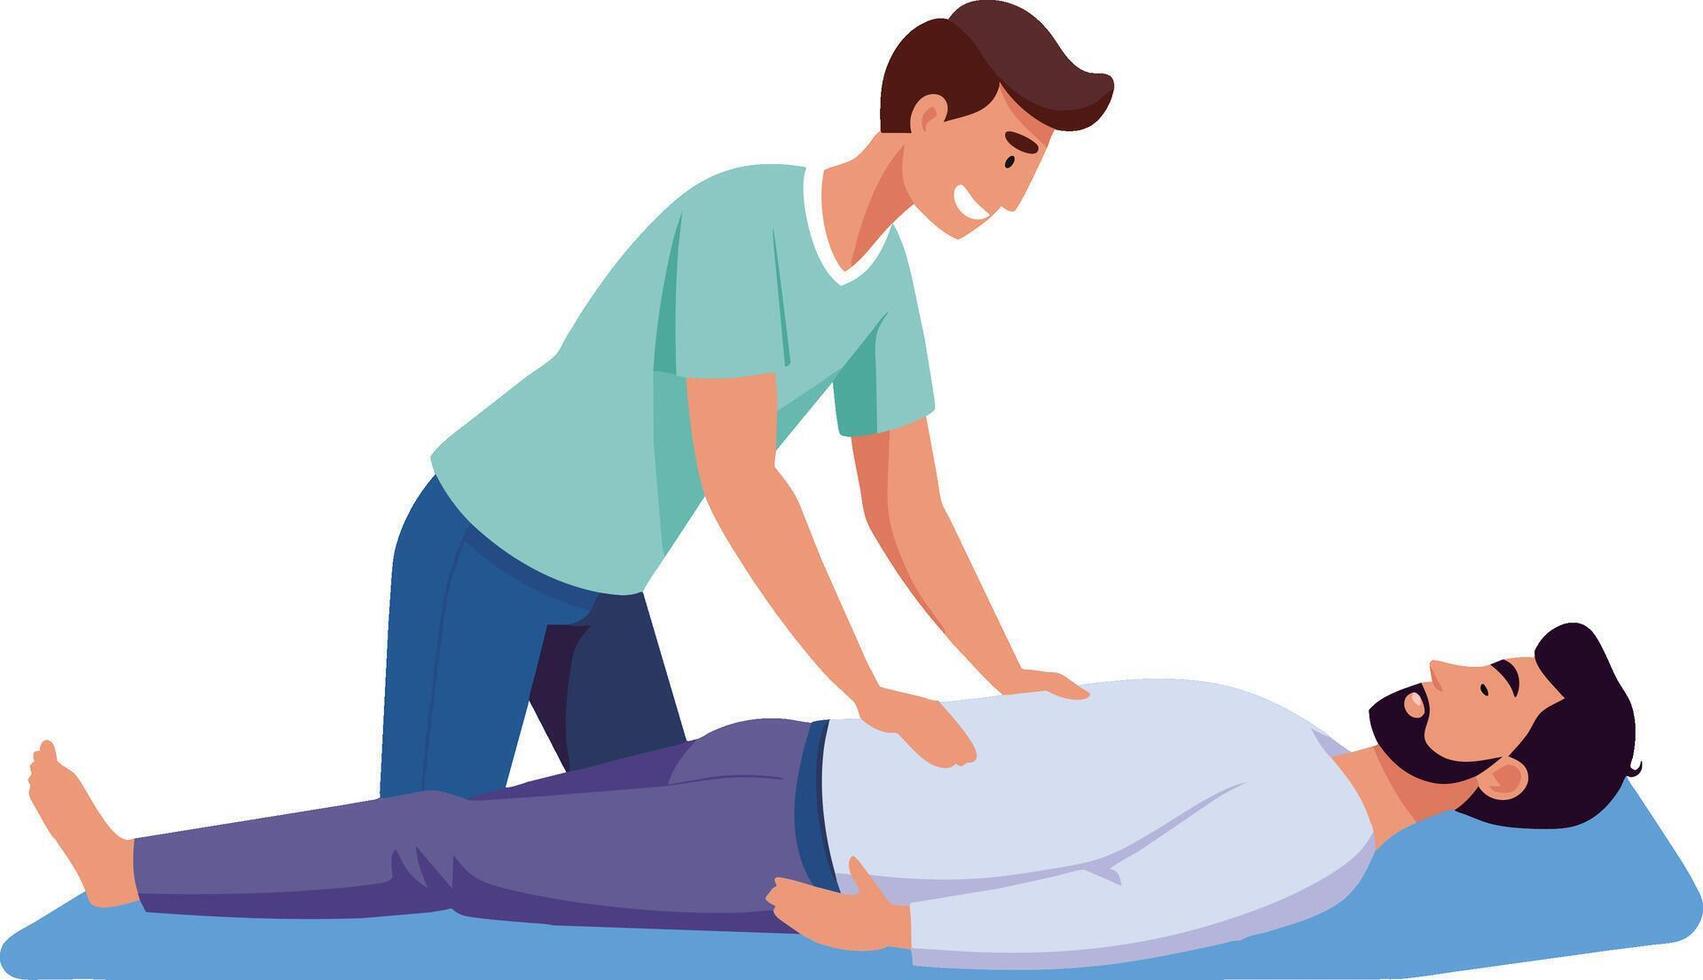 young professional massage therapist and patient isolation vector